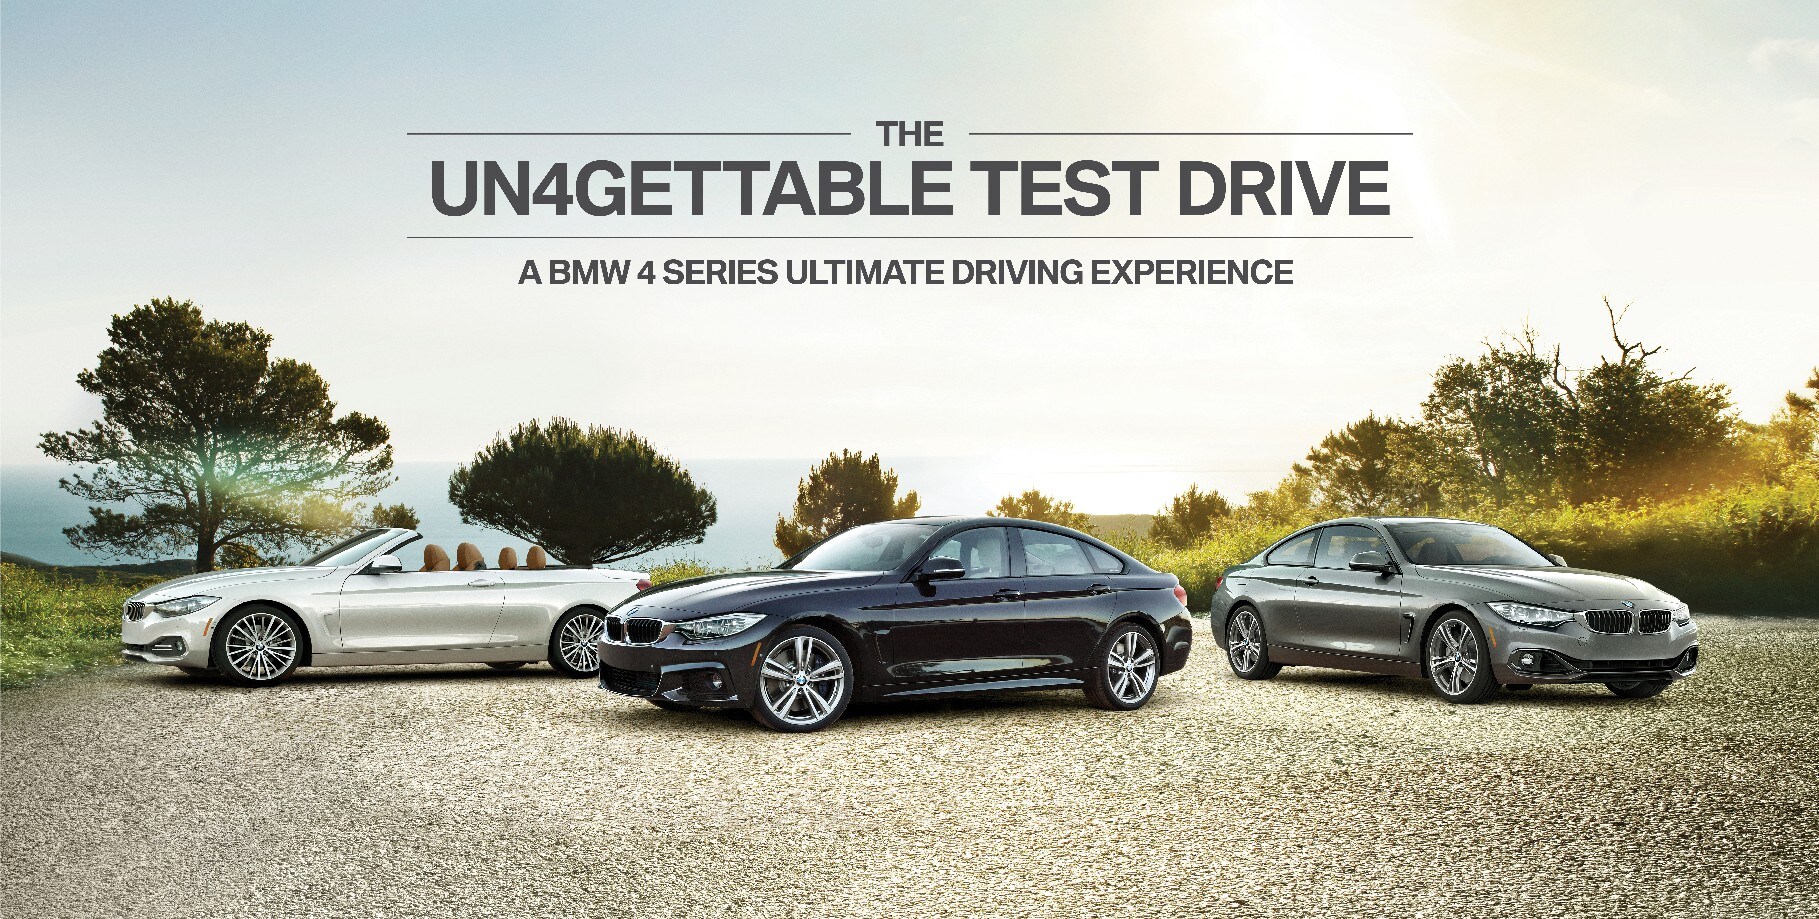 Bmw test drive experience #2